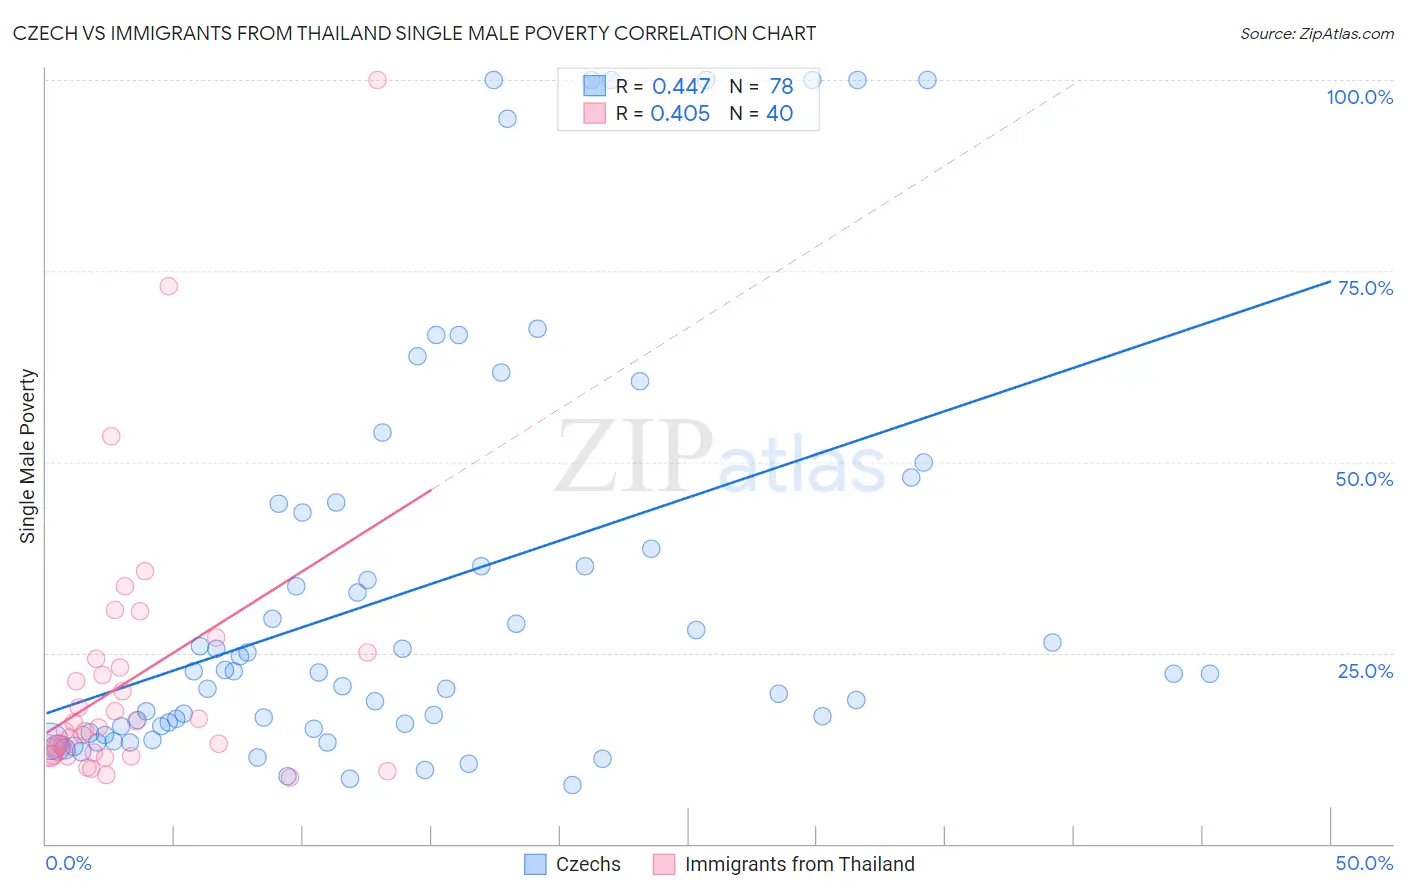 Czech vs Immigrants from Thailand Single Male Poverty